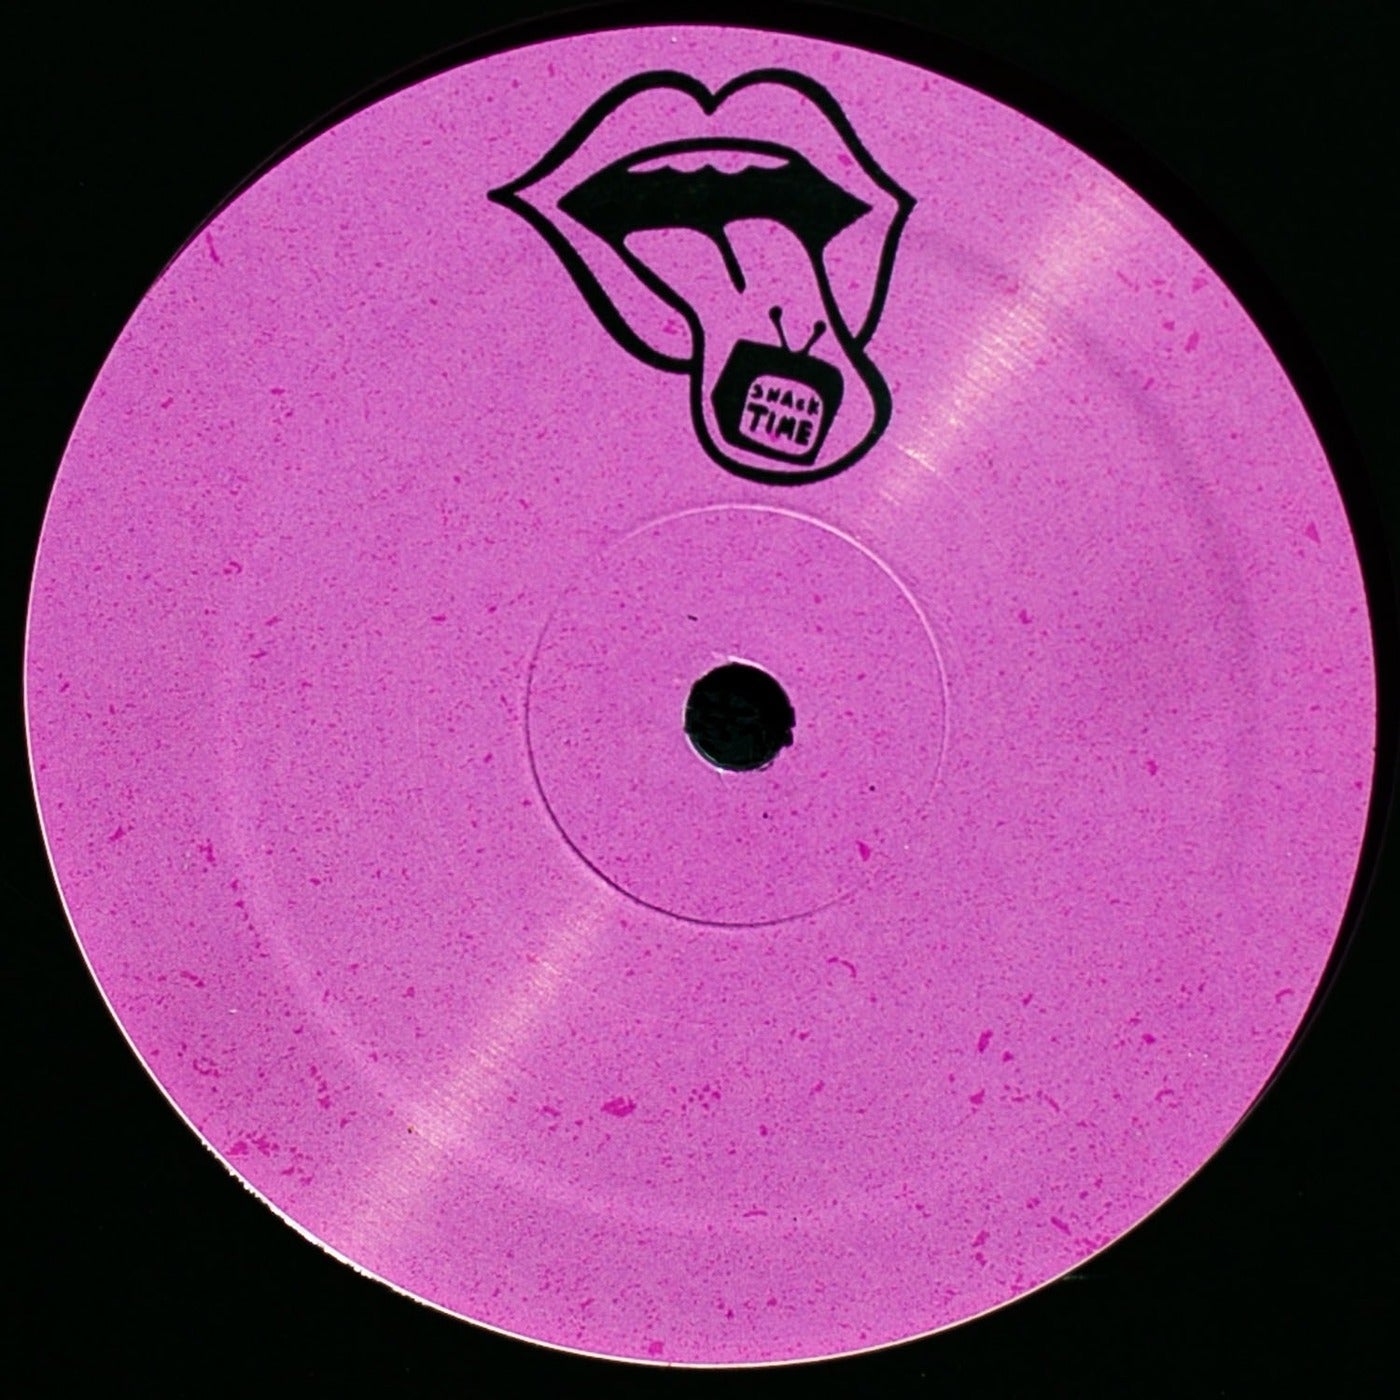 The Pink Record